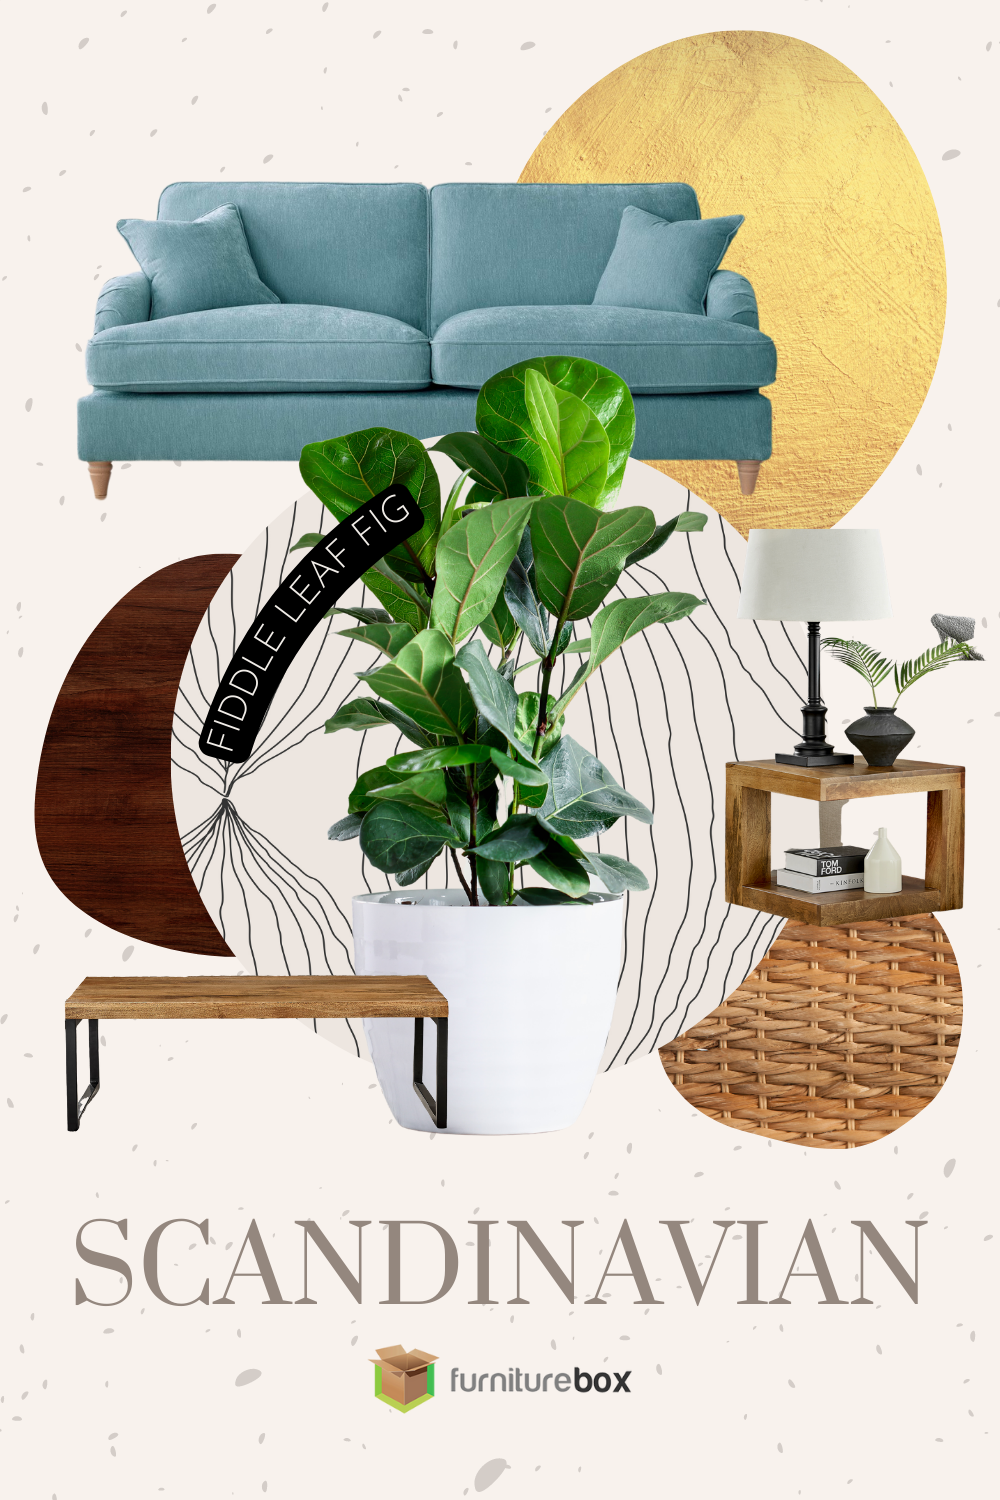 Houseplant interior design for Scandinavian style using a fiddle-lead fig plant and neutral colours, patterns and furniture pieces.  